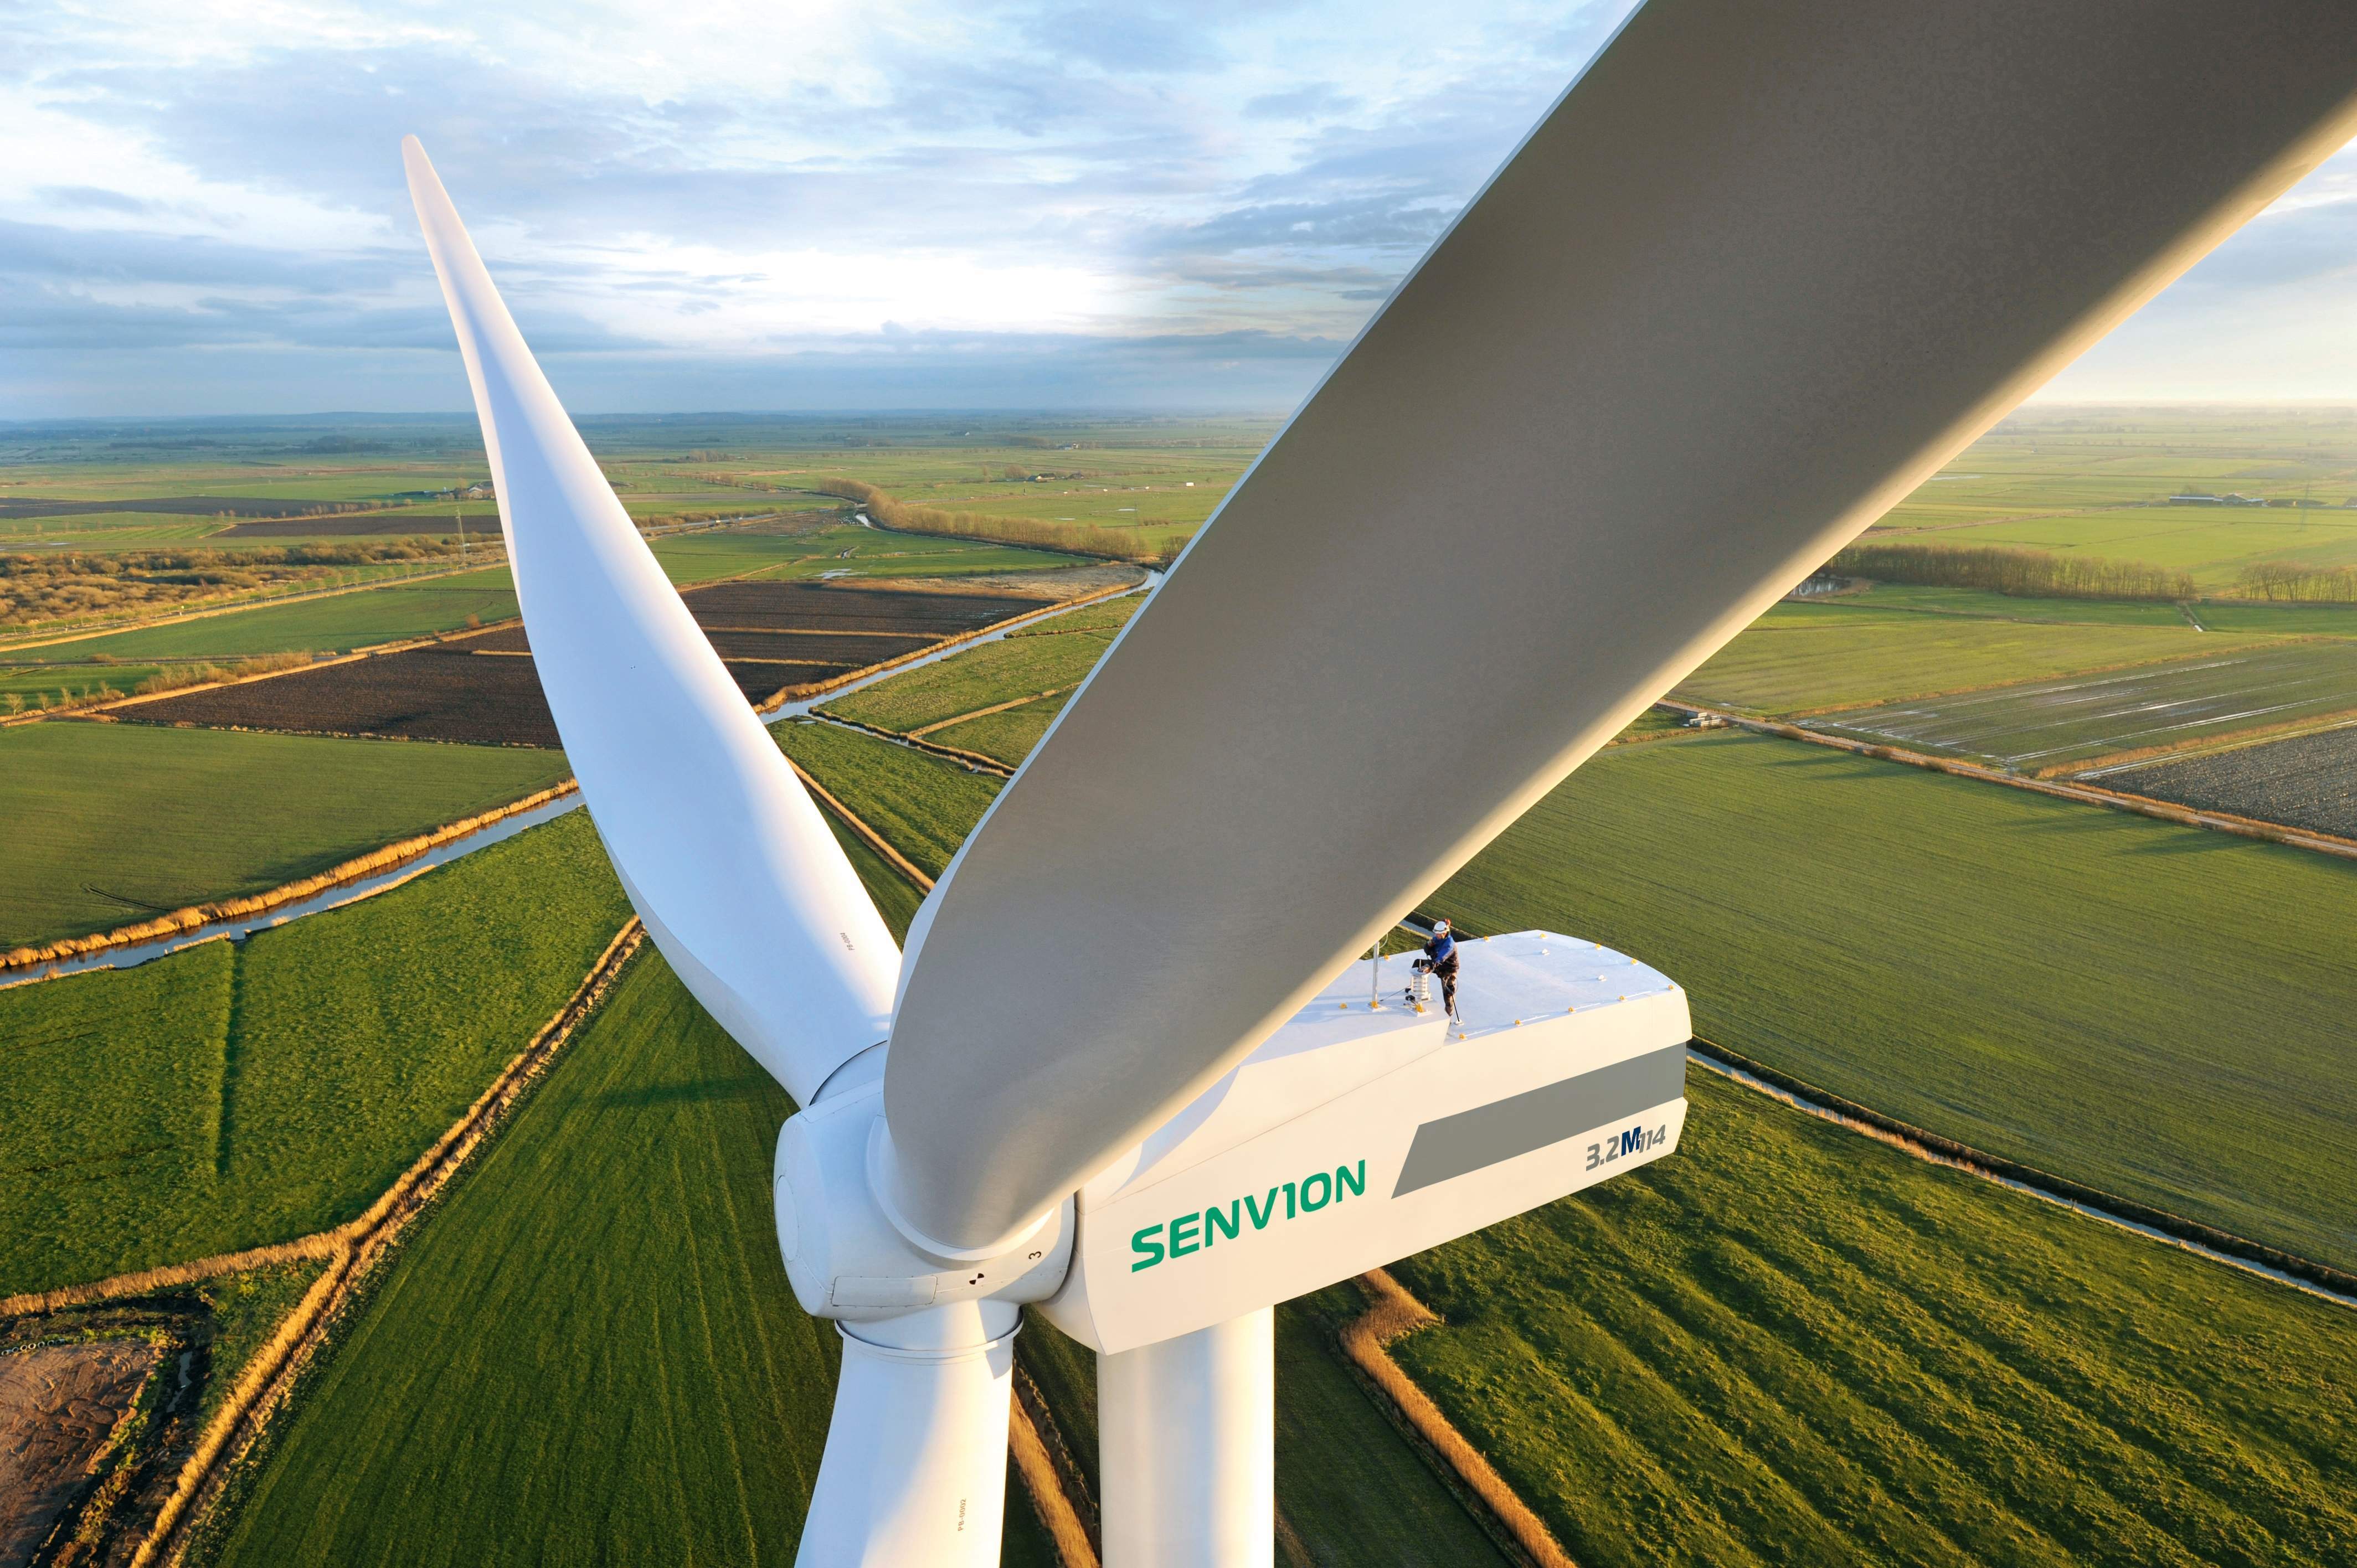 Senvion reaches 120MW of installed capacity in Argentina